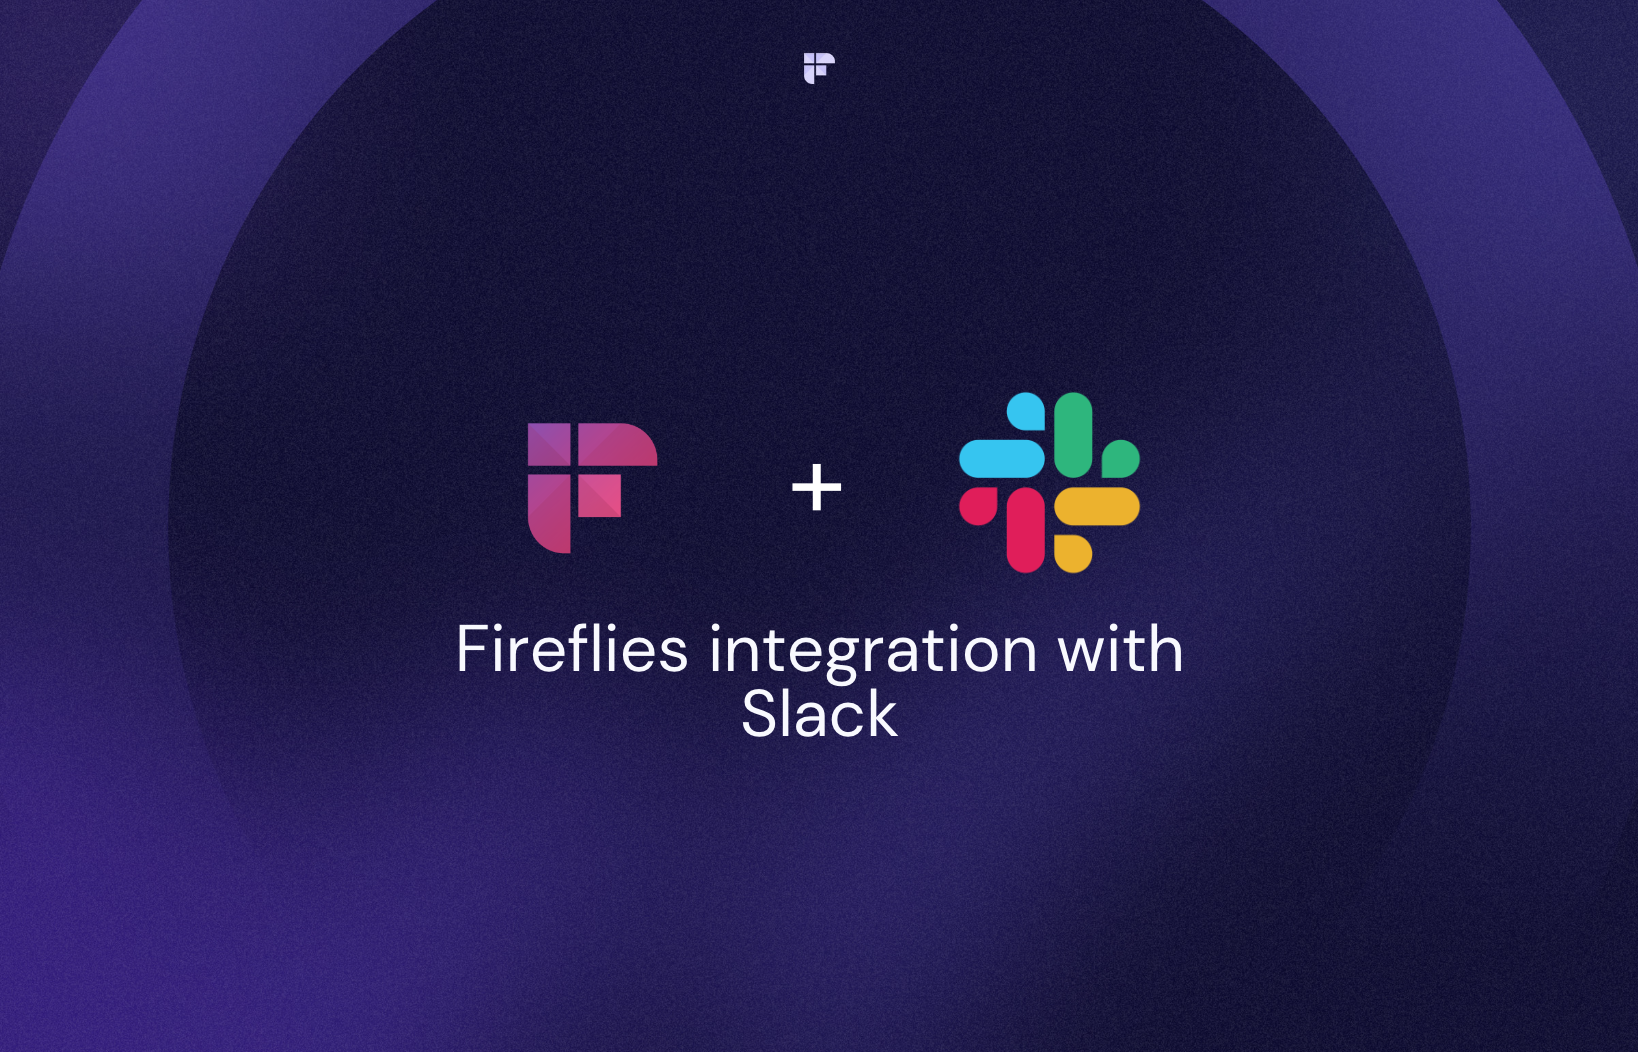 Feature Focus: Send Automated Meeting Notes with the Fireflies-Slack Integration